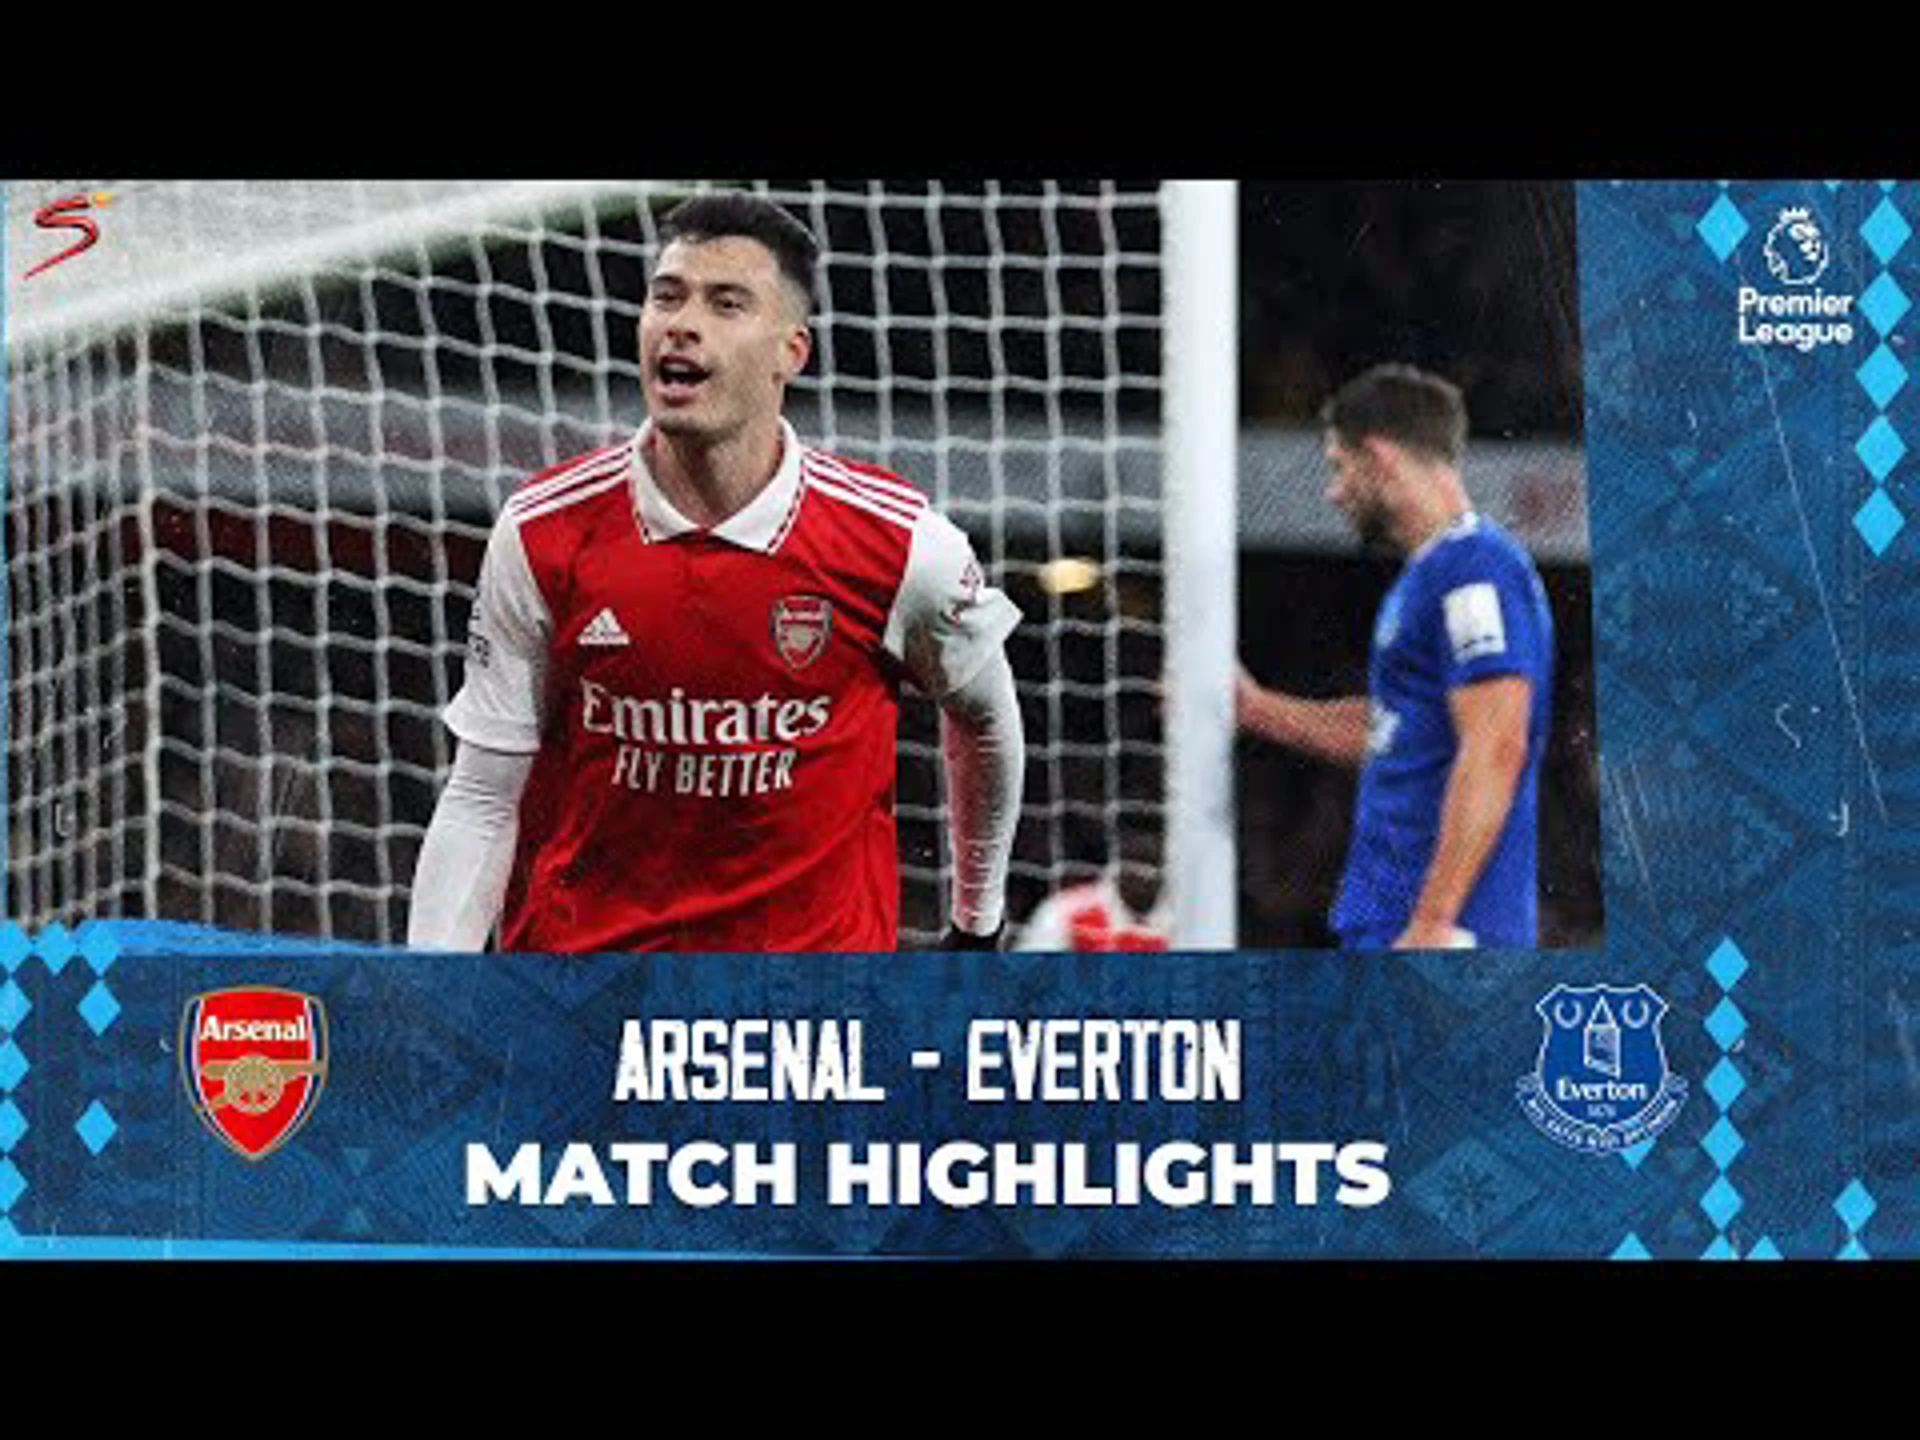 Premier League | Arsenal v Everton | Match in 3 minutes